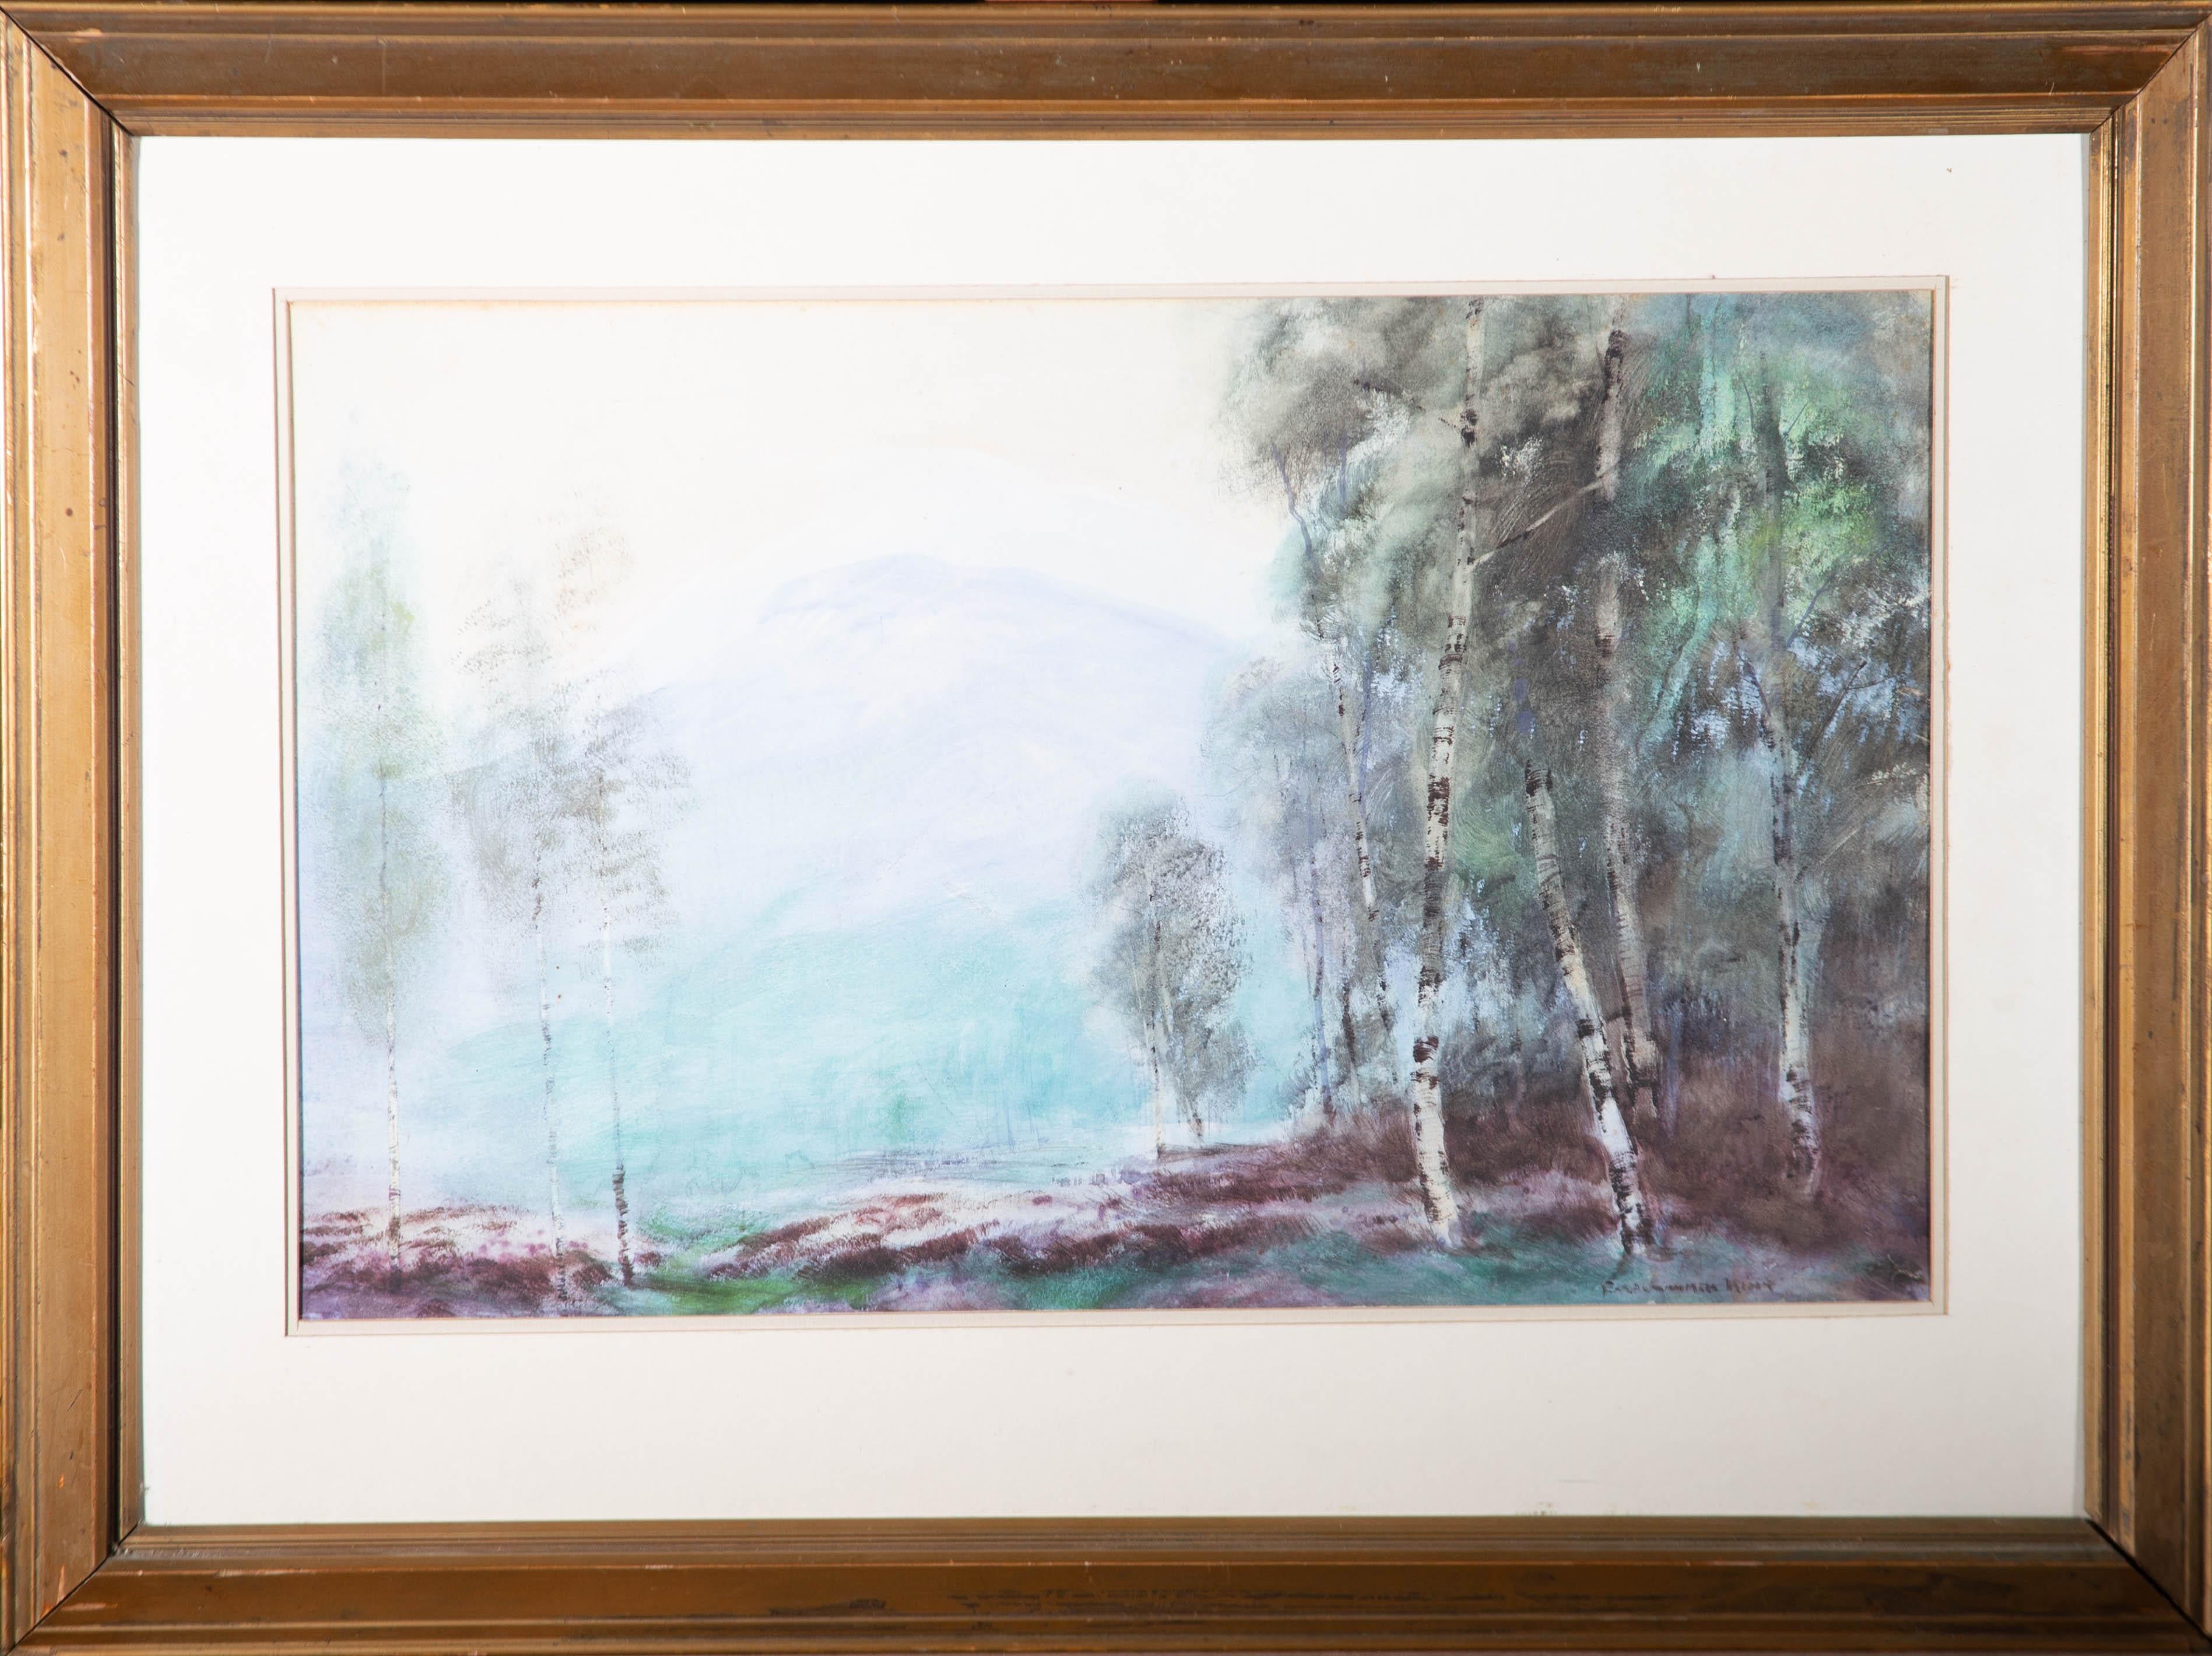 A delightful watercolour painting with gouache details by the artist Baragwanath King, depicting a morning woodland scene. Presented in a double card mount and gilt effect frame. Signed. On watercolour paper.
